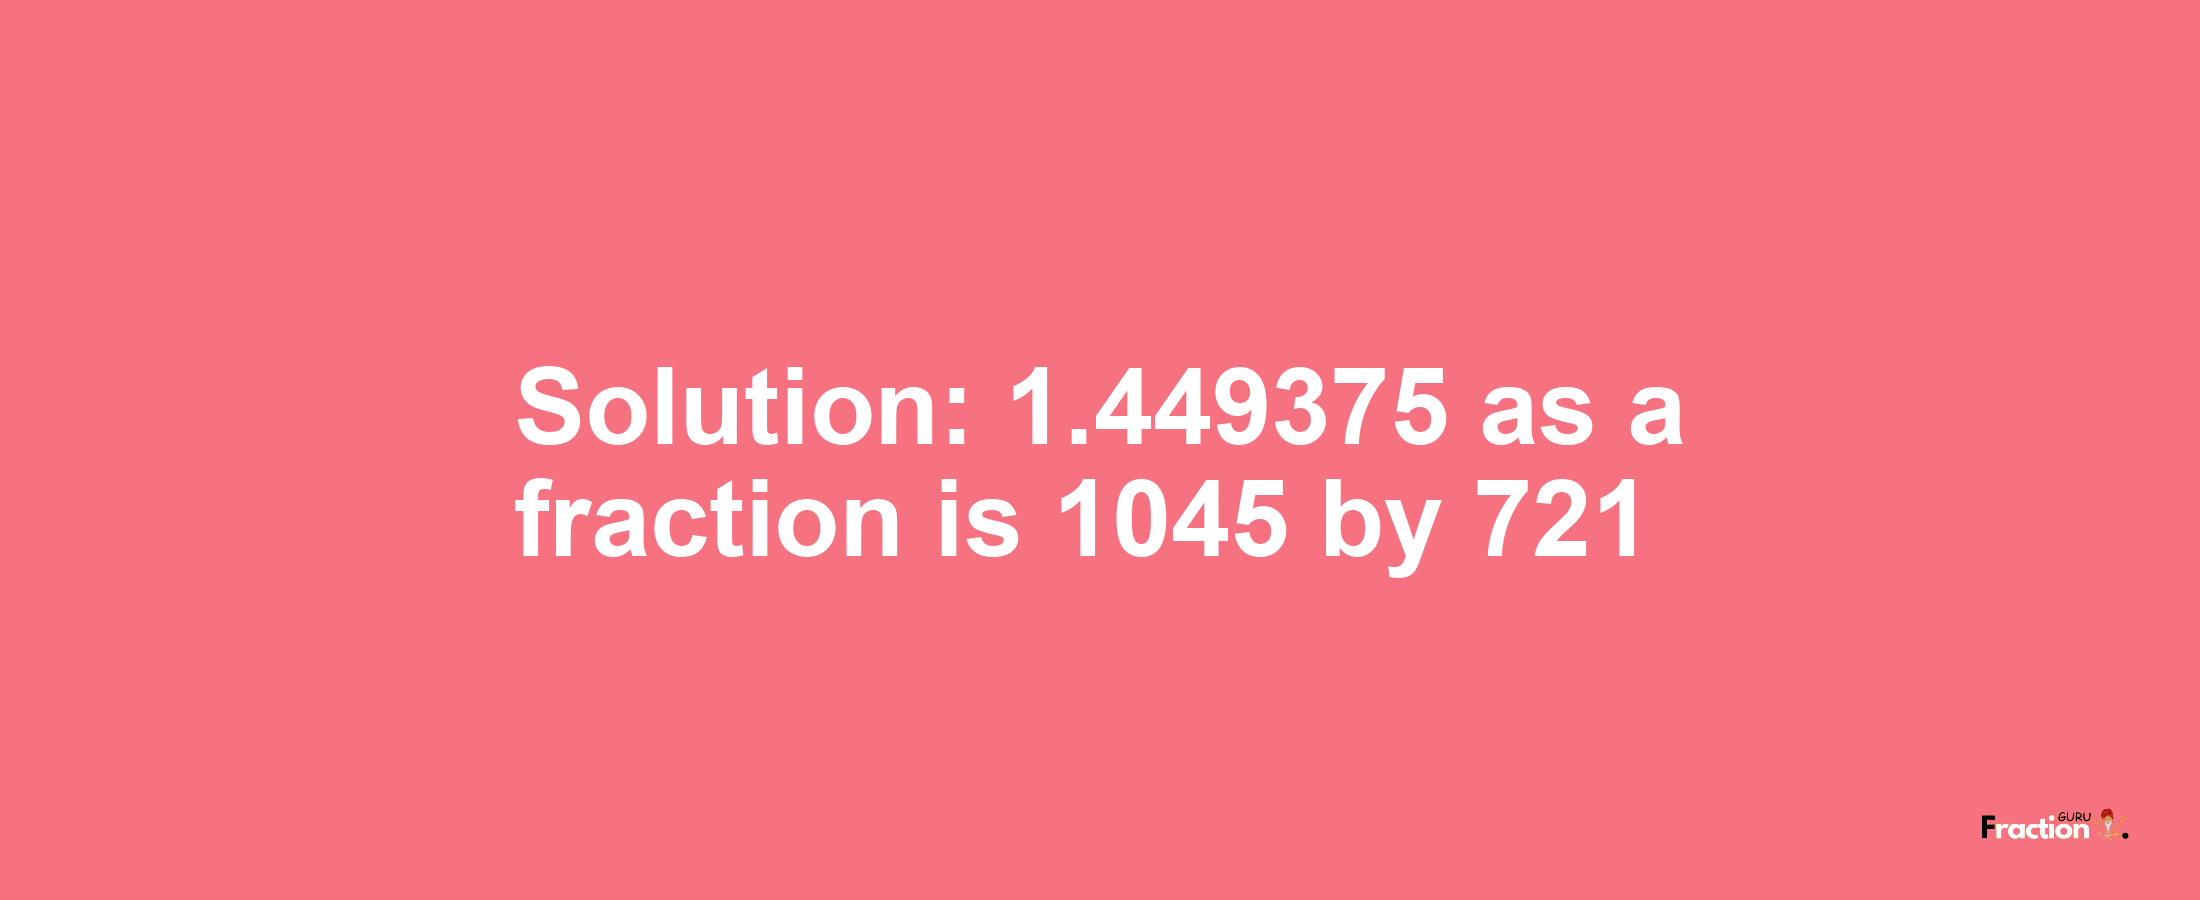 Solution:1.449375 as a fraction is 1045/721